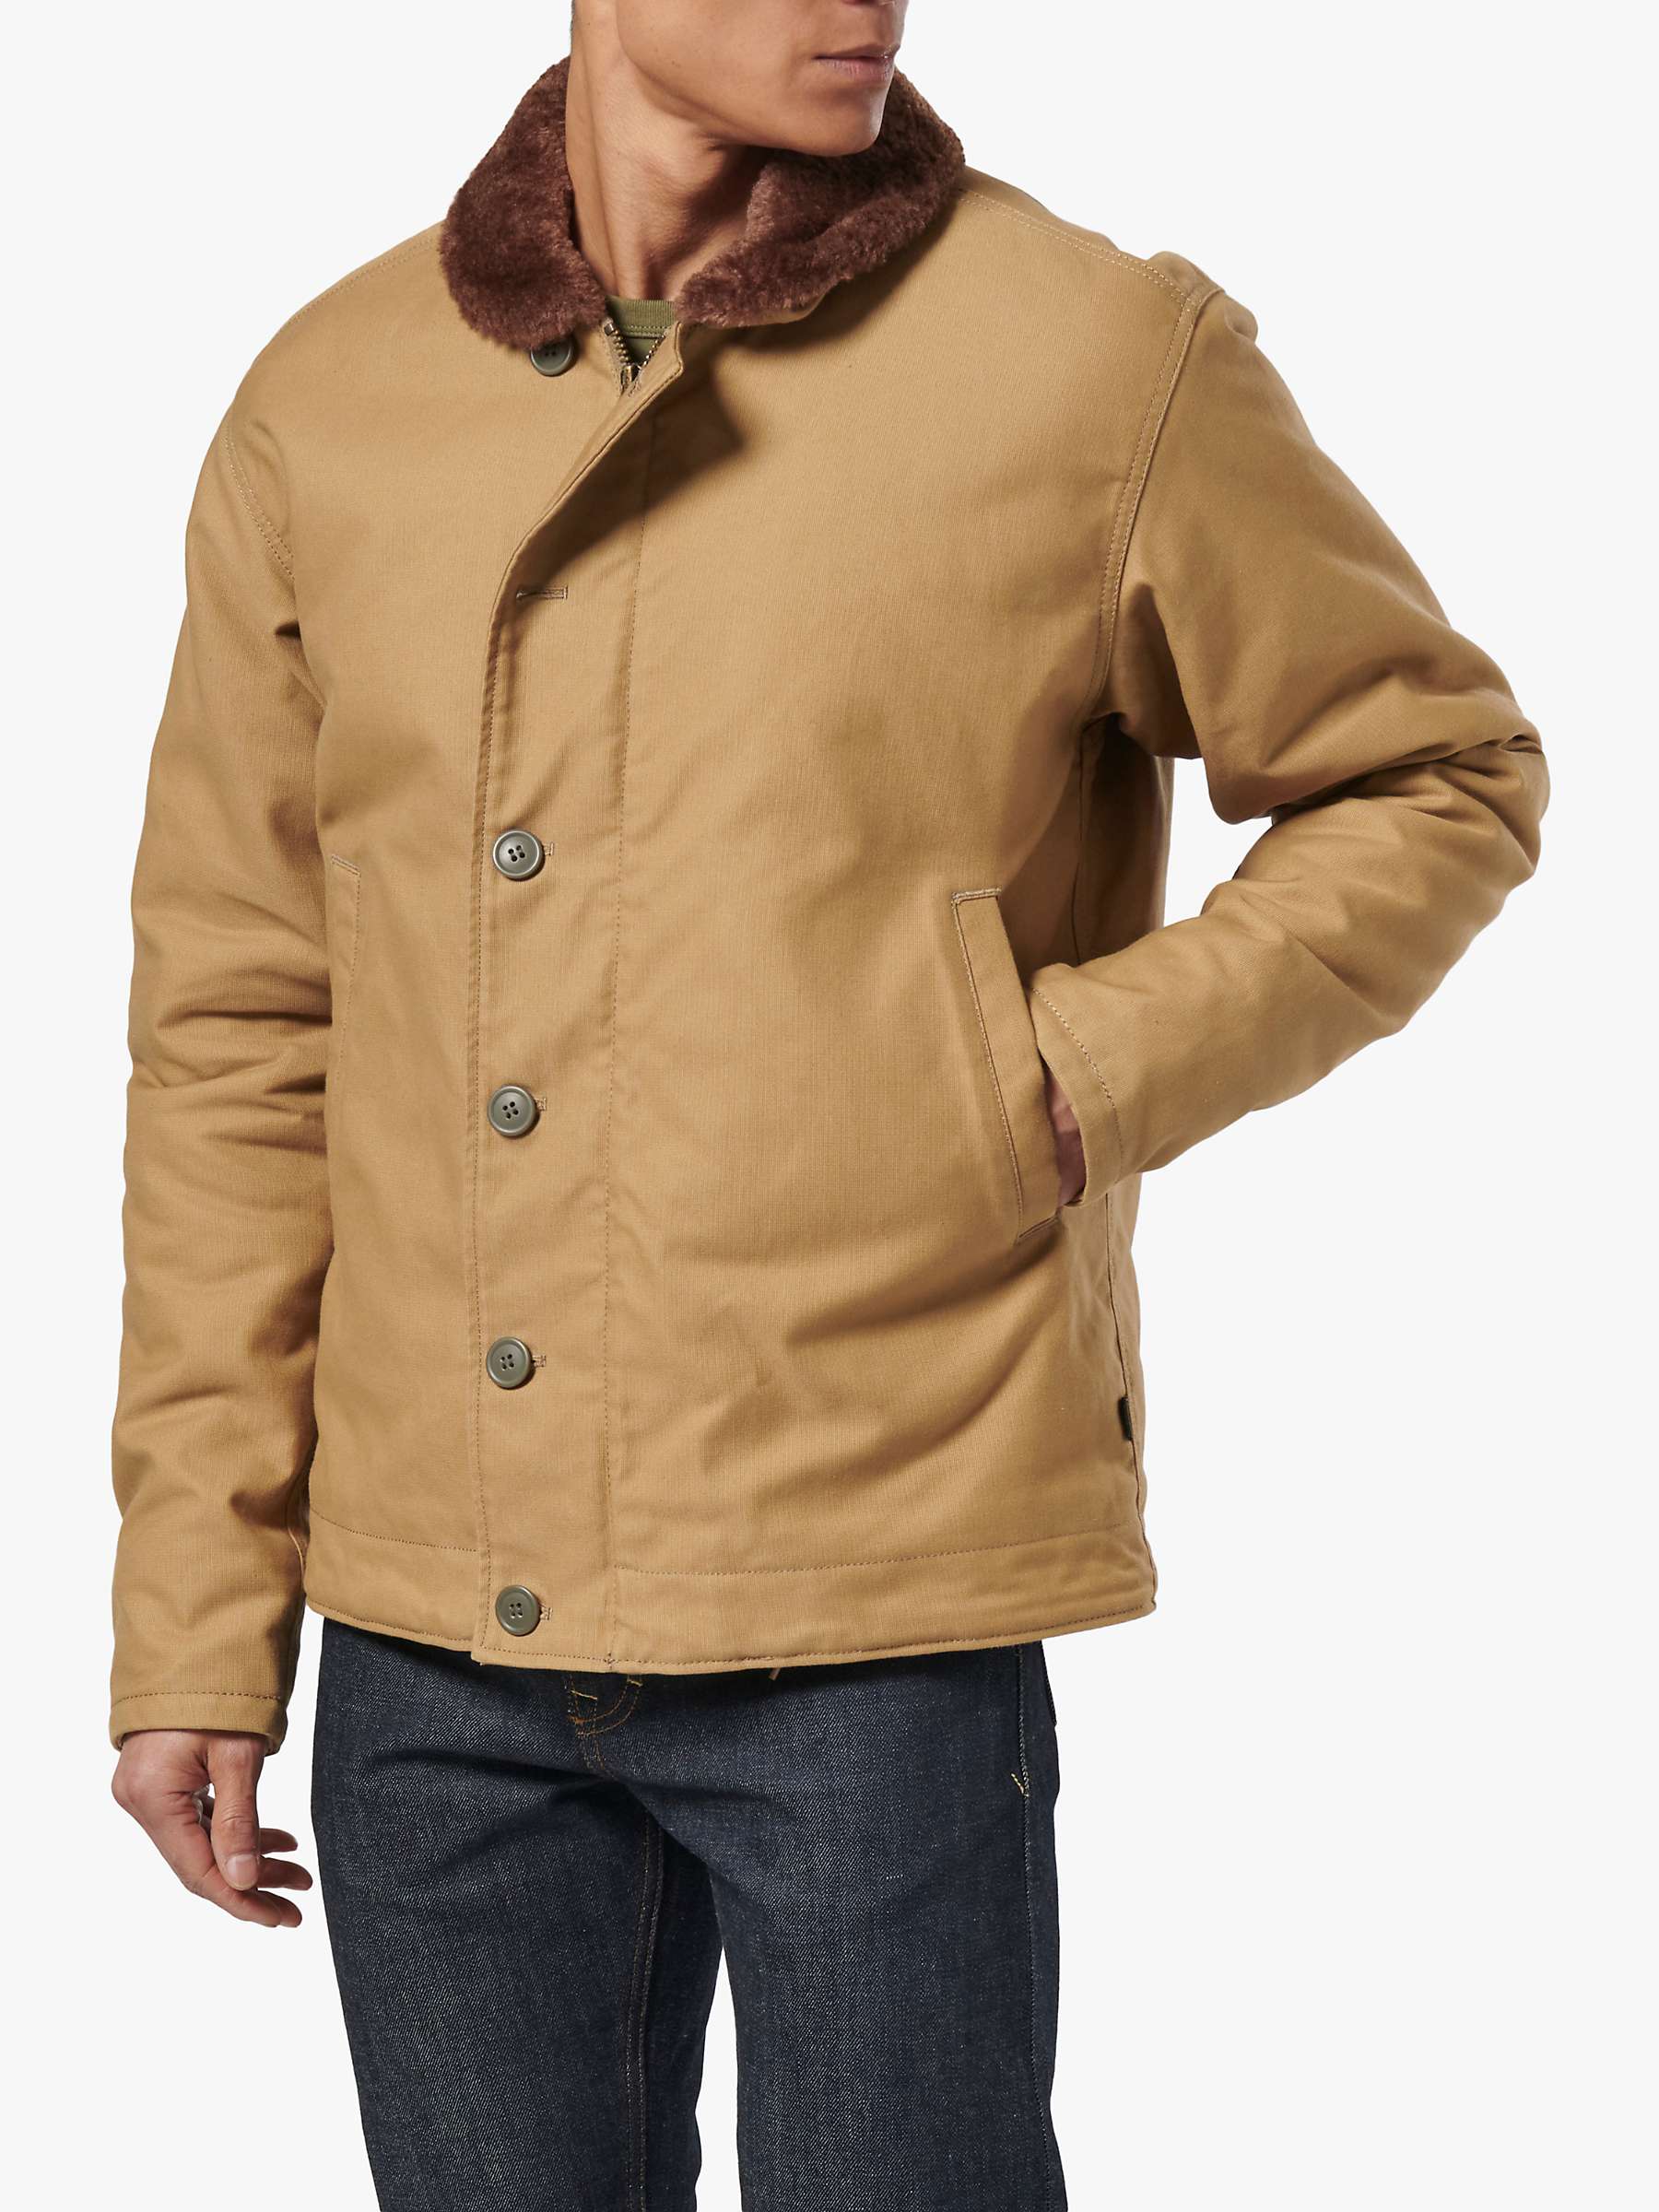 Buy Triumph Motorcycles Marstone Jacket Online at johnlewis.com